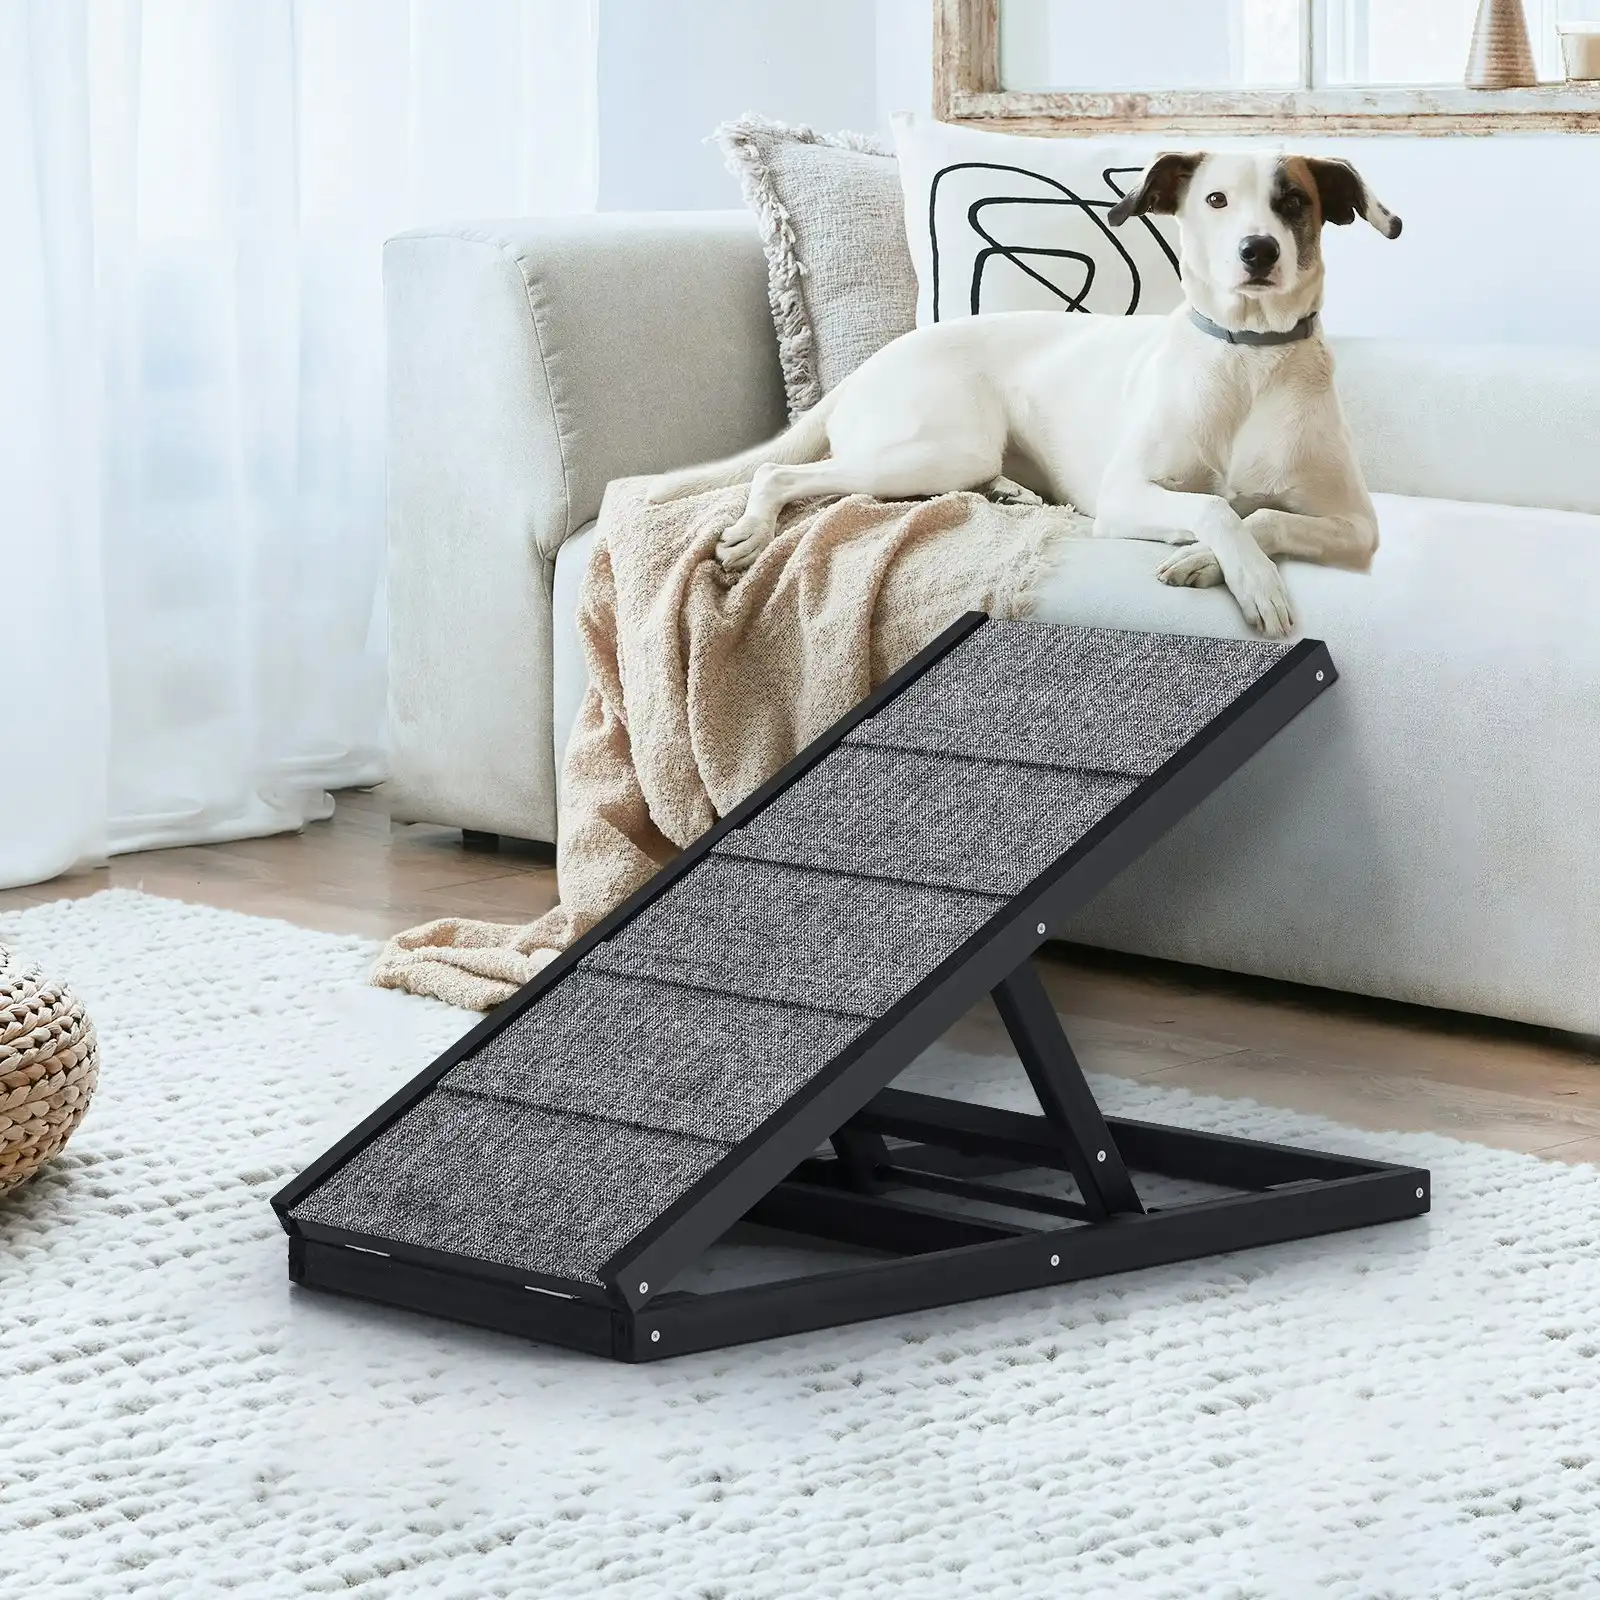 Alopet Dog Pet Ramp Adjustable Height Dogs Stairs Bed Sofa Car Foldable 70cm